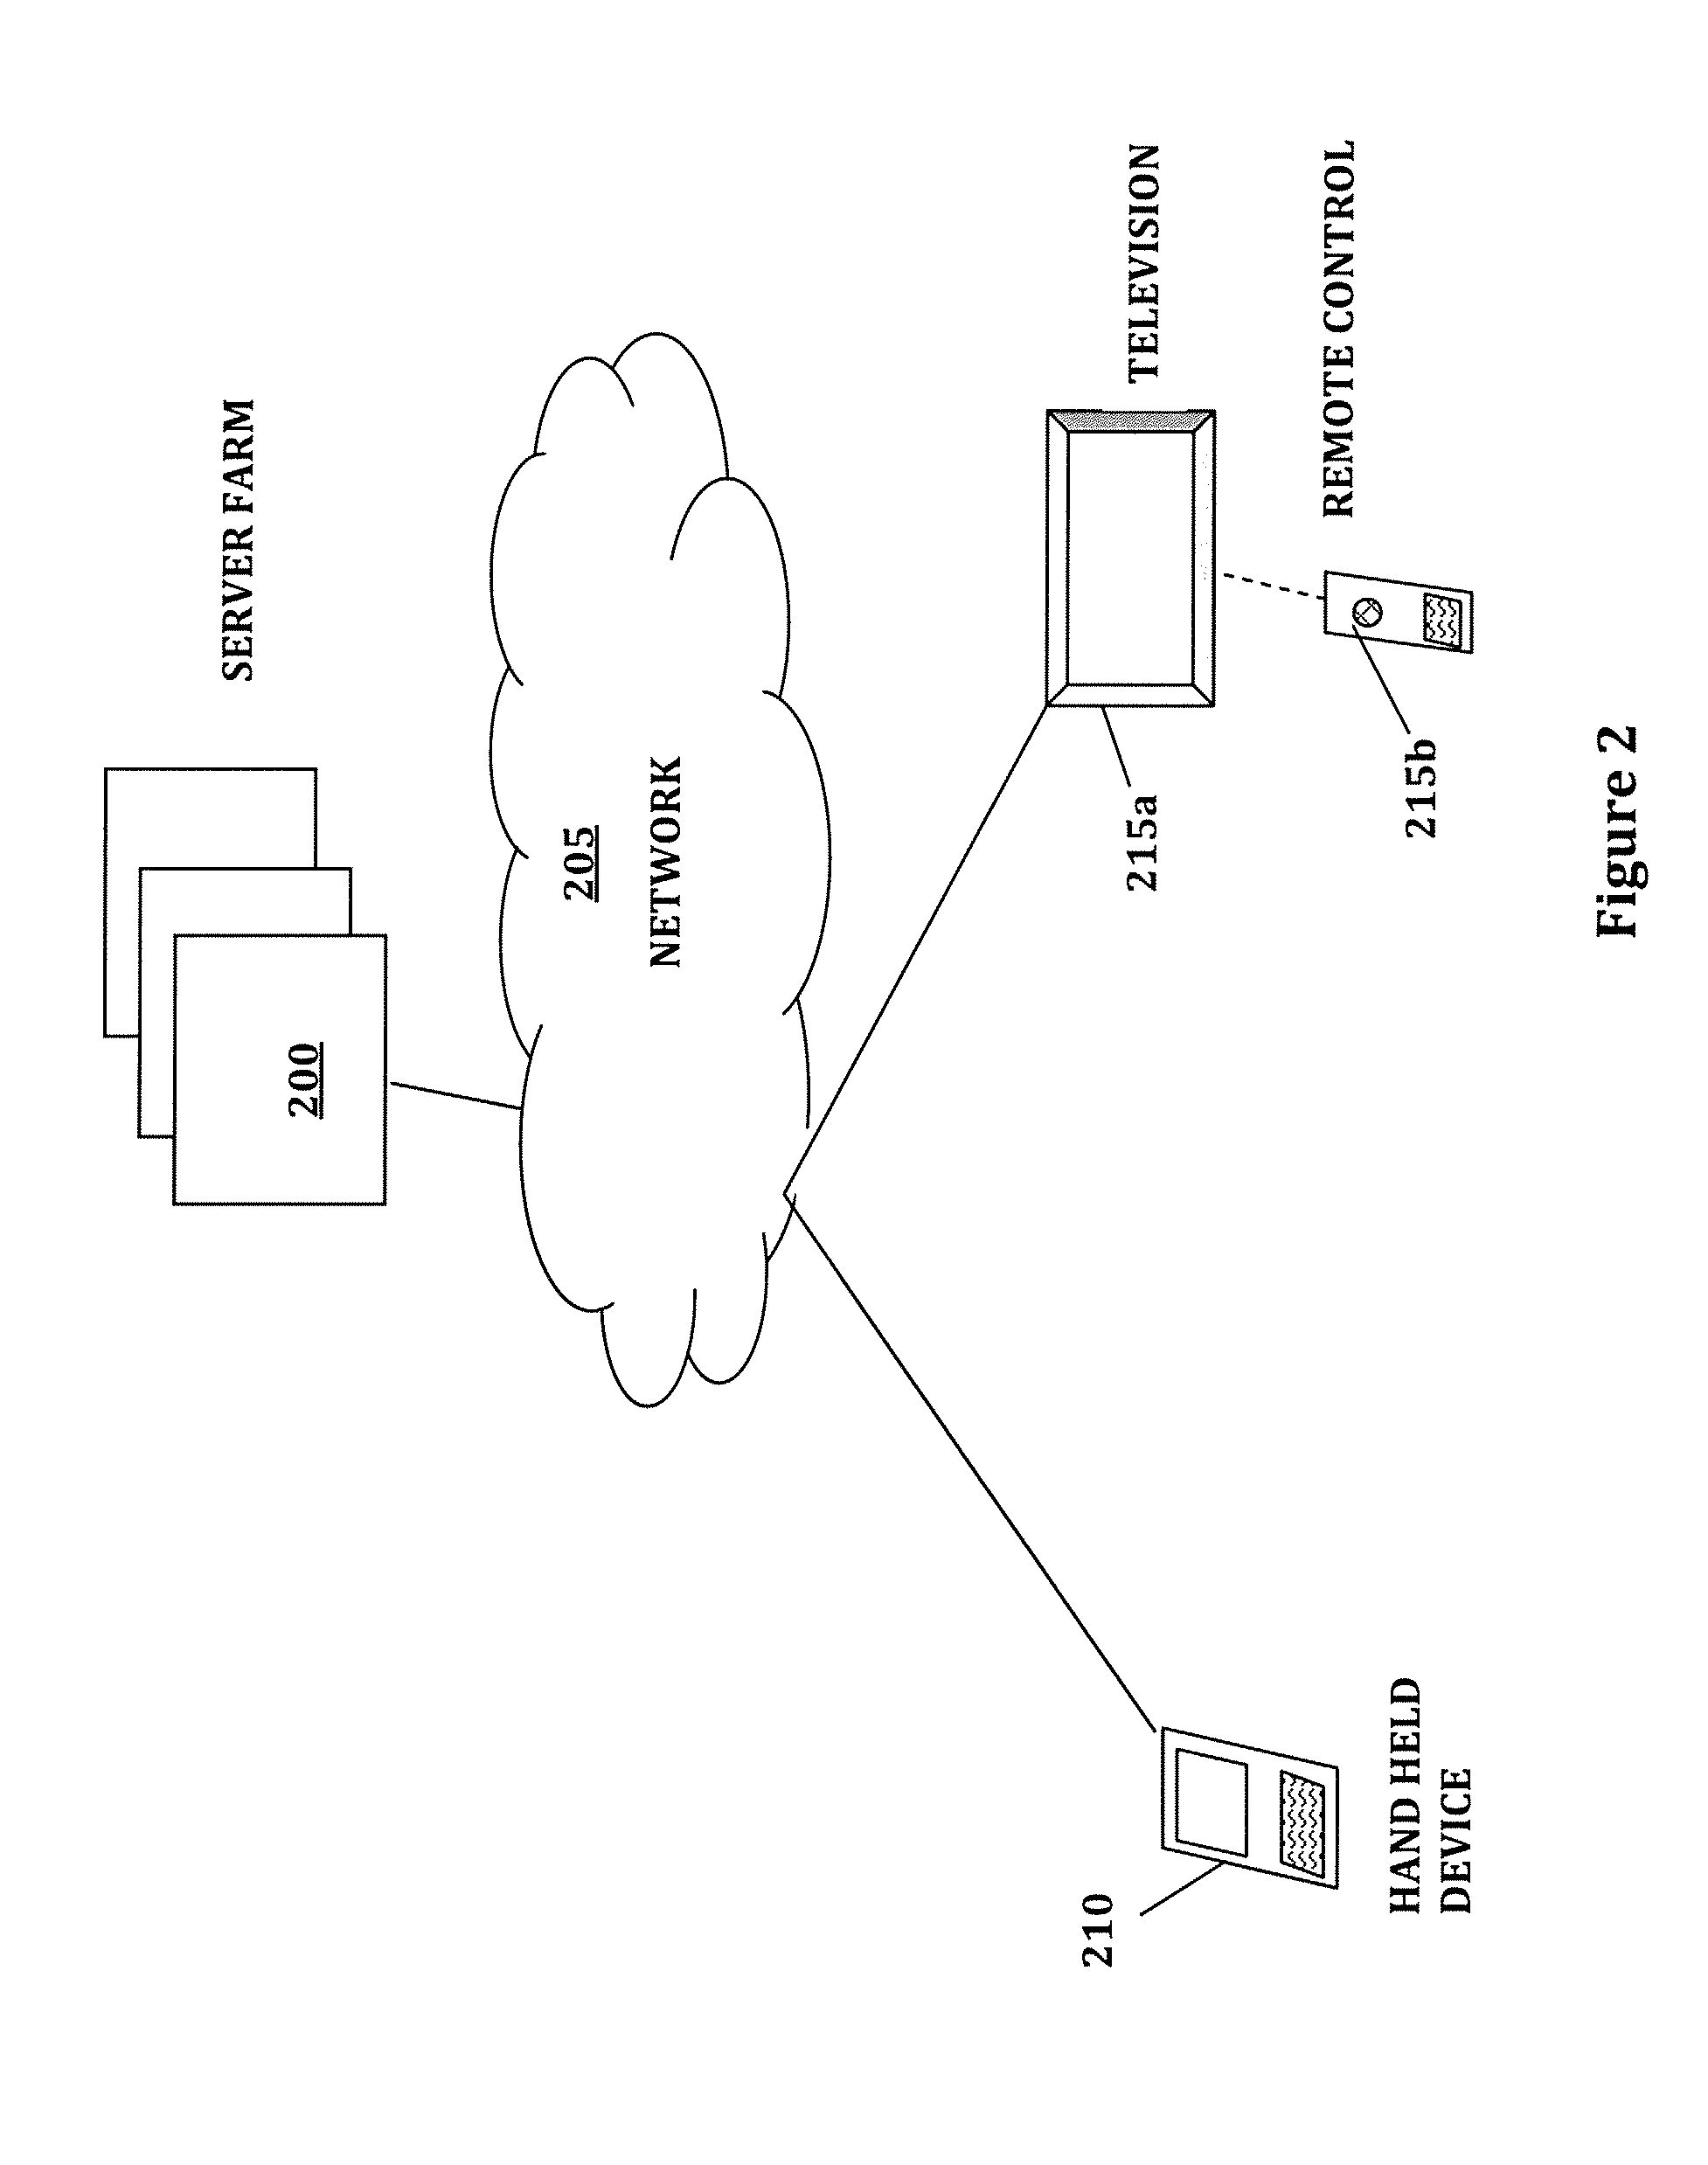 System and method for search with reduced physical interaction requirements